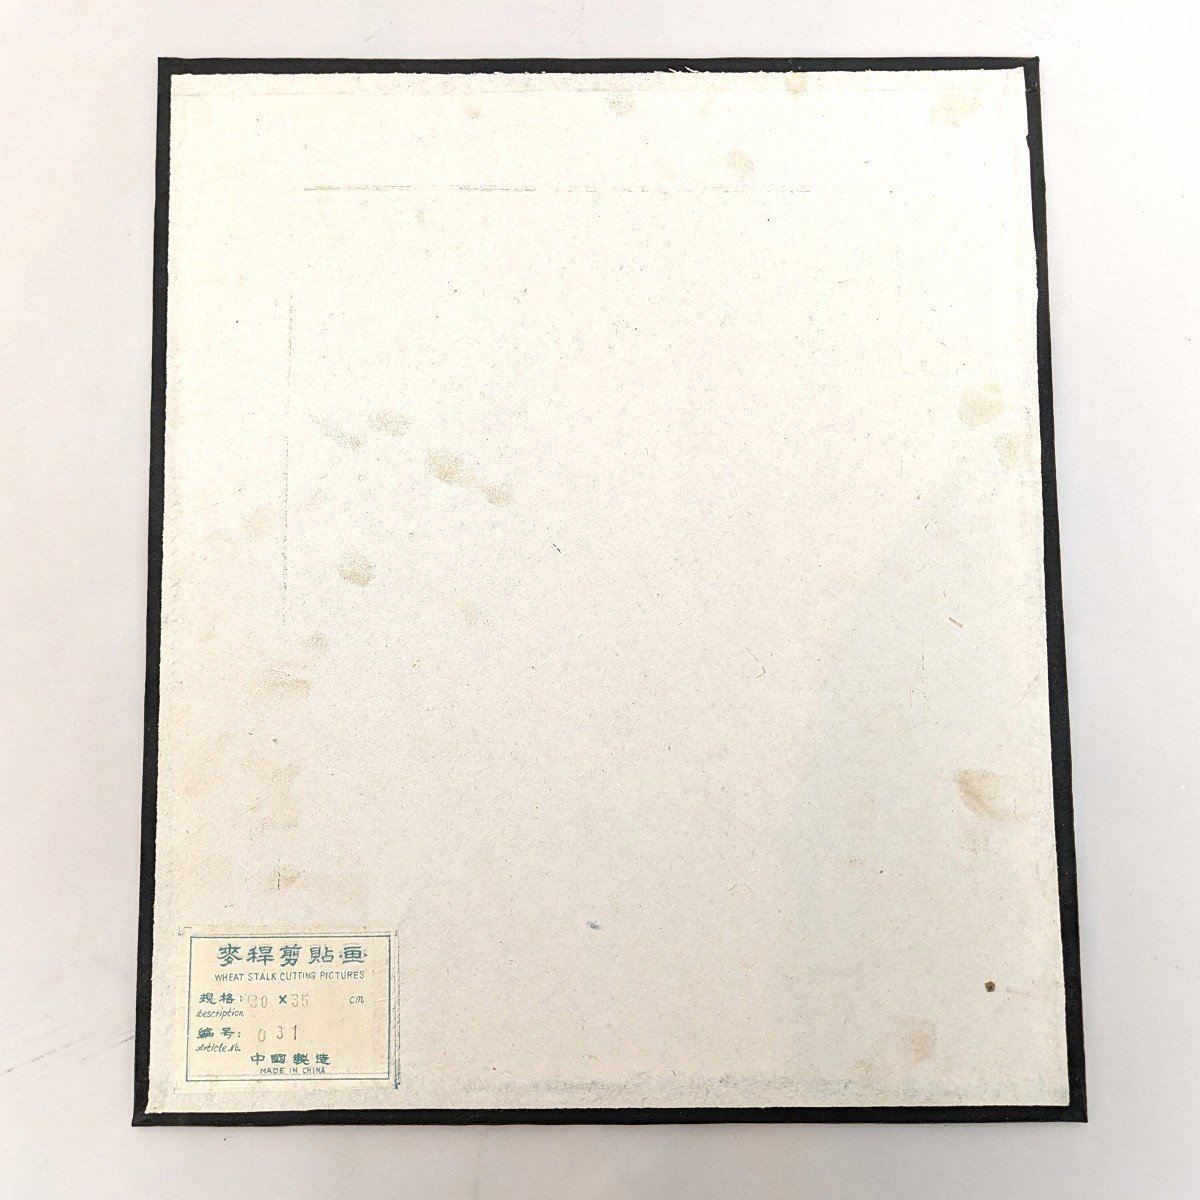  made in China * wheat ...* picture frame *No.230531-01* packing size 100